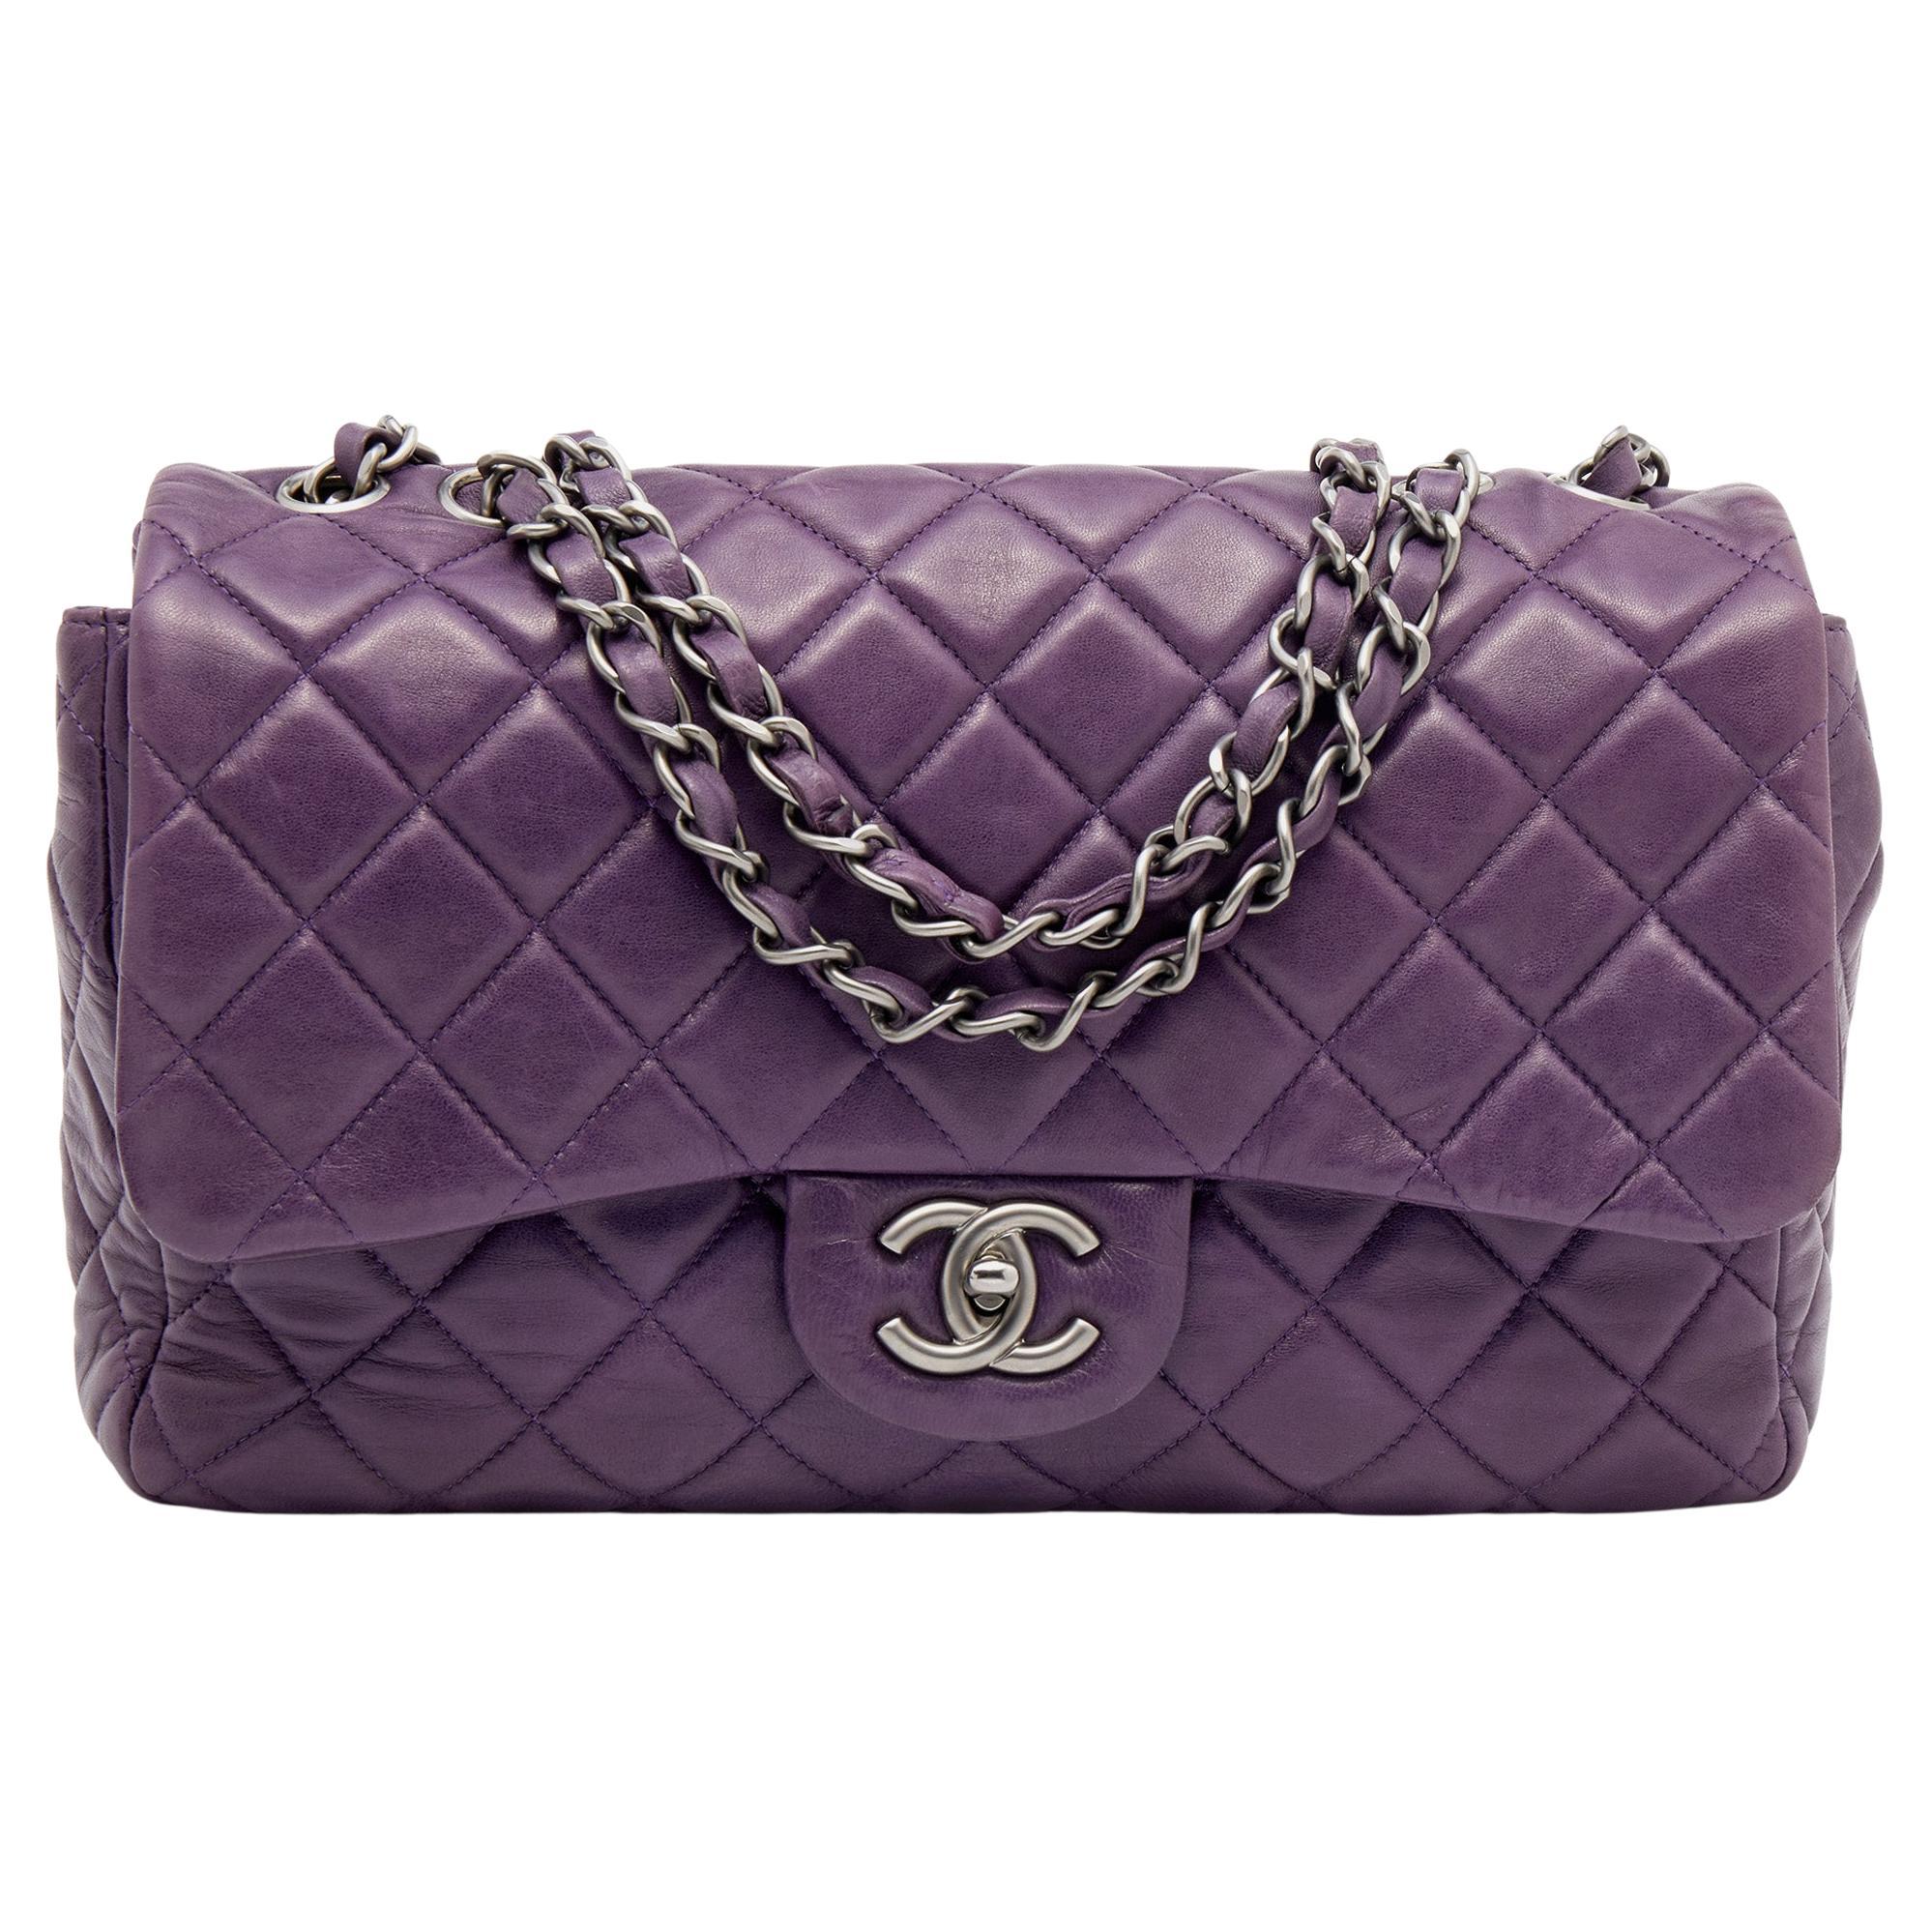 Chanel Purple Quilted Leather Jumbo Classic Flap Bag